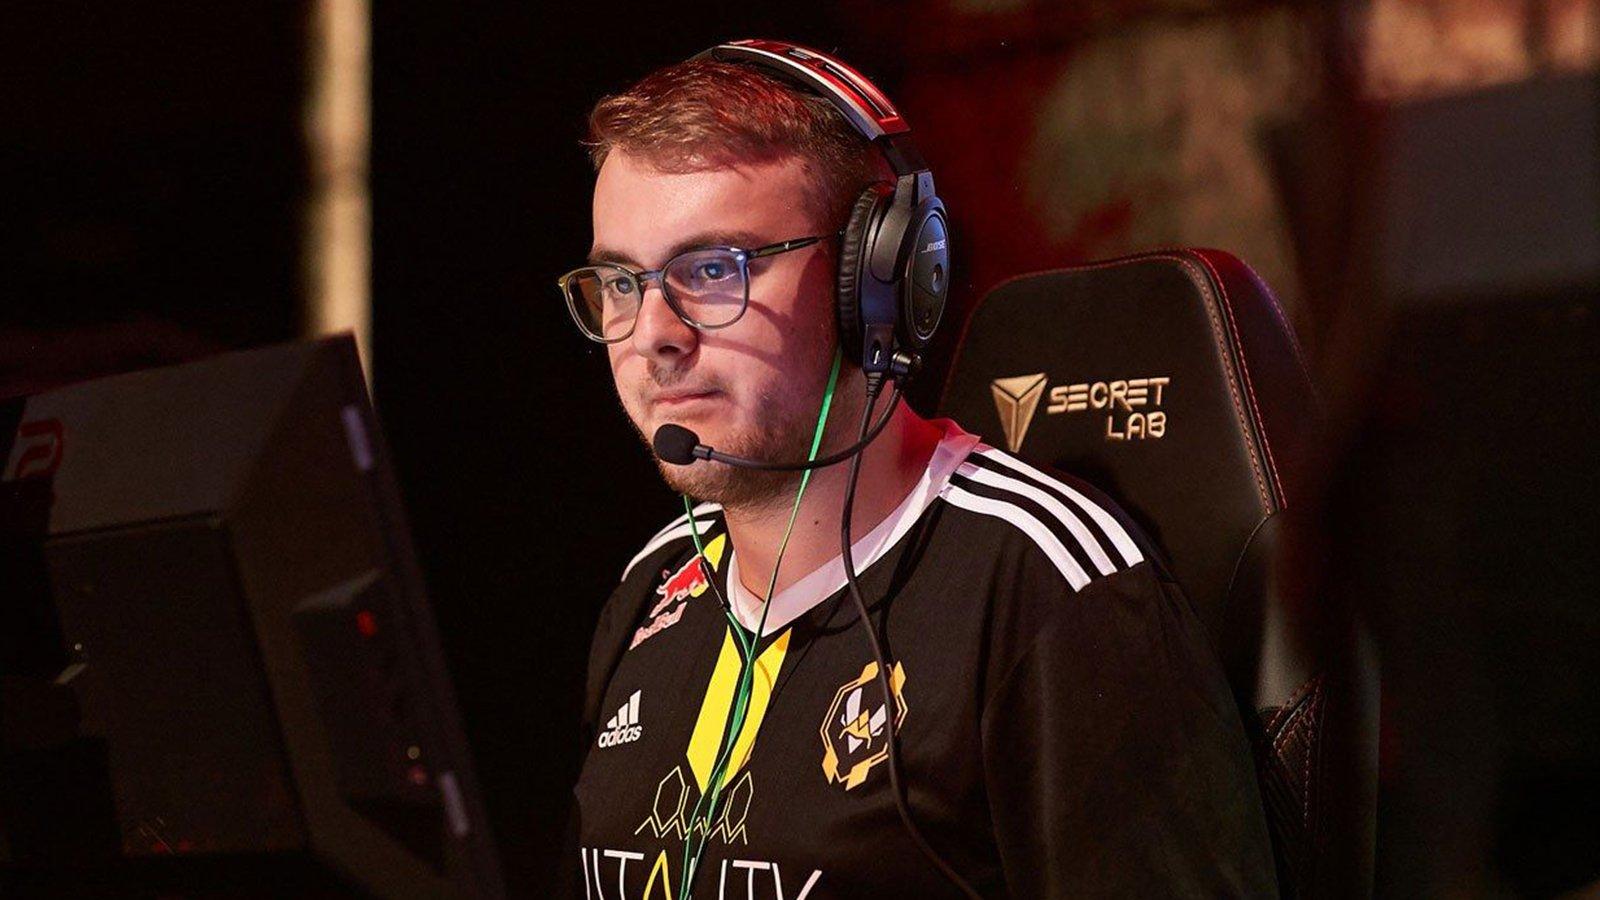 Alex playing for Vitality in CS:GO